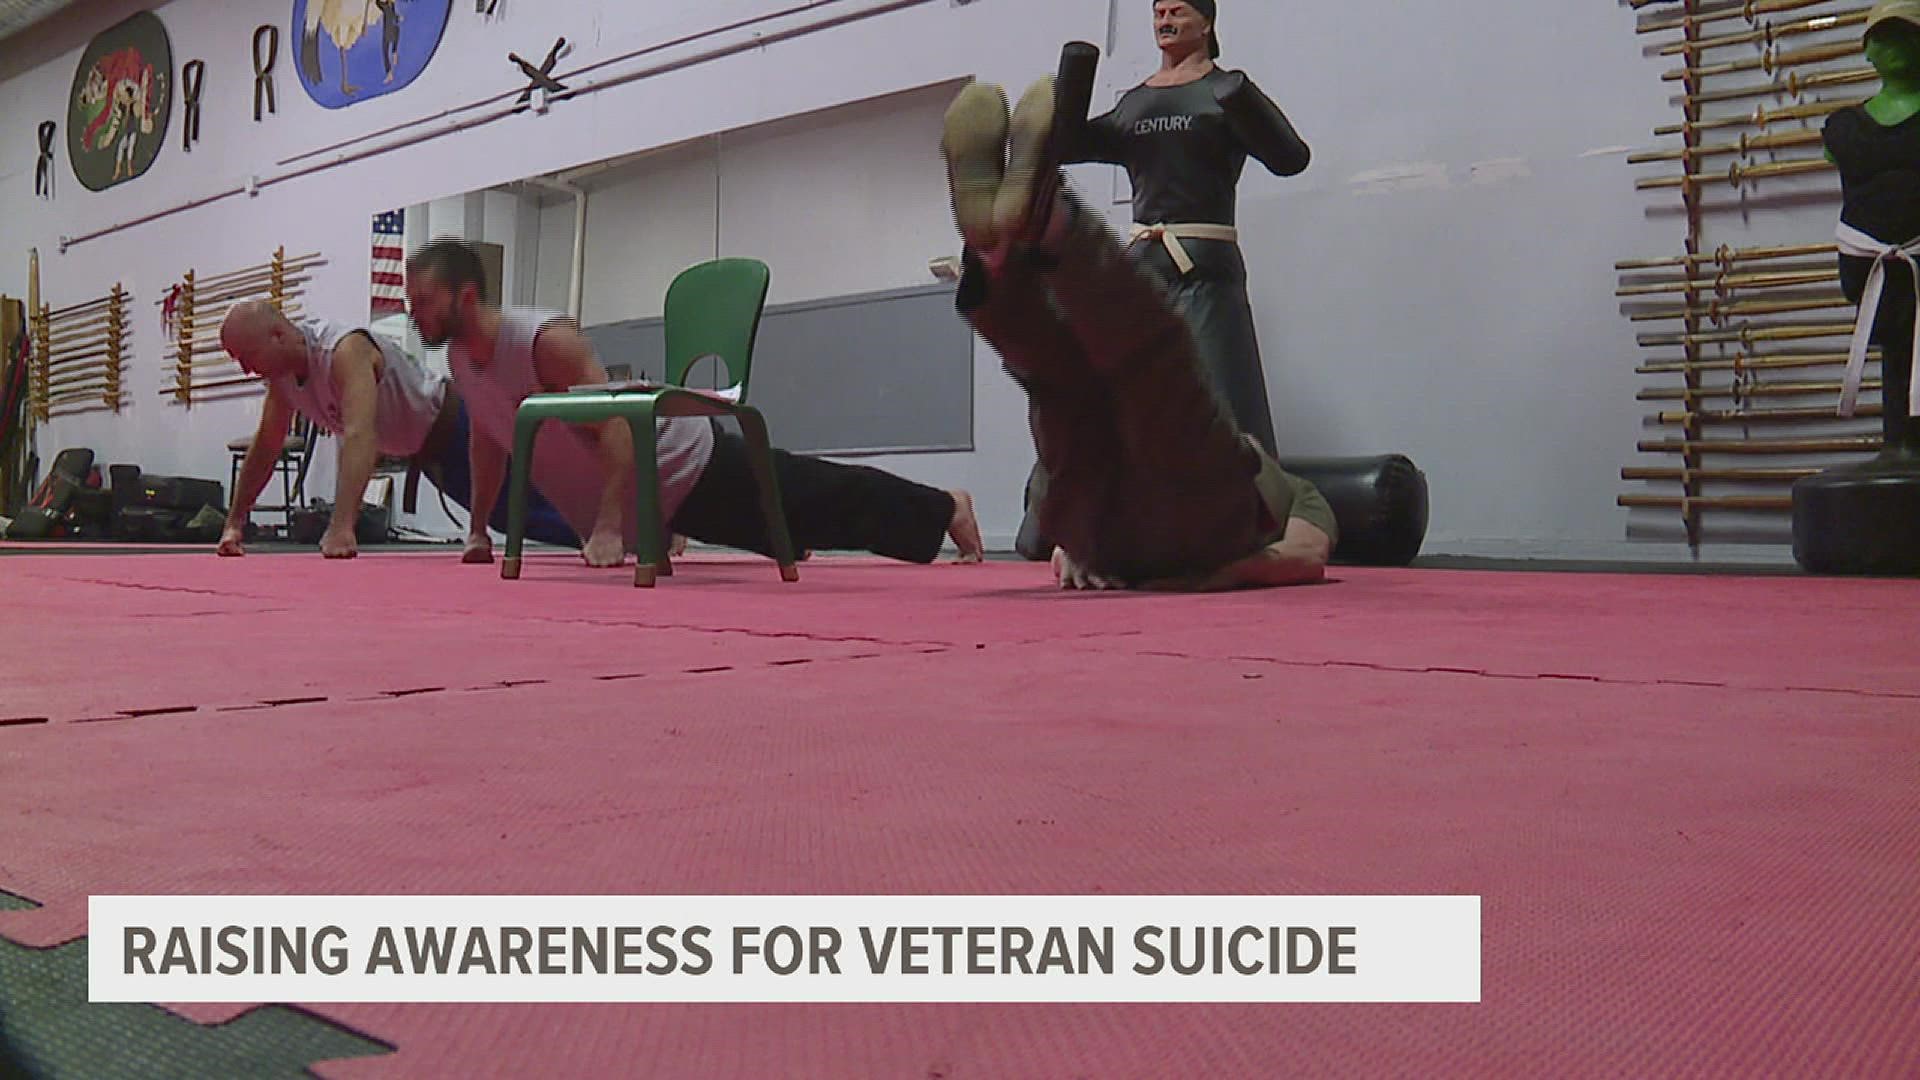 Every day, about 22 veterans commit suicide in the United States. John Morrow wanted to raise money and awareness for the issue with a heavy workout routine.